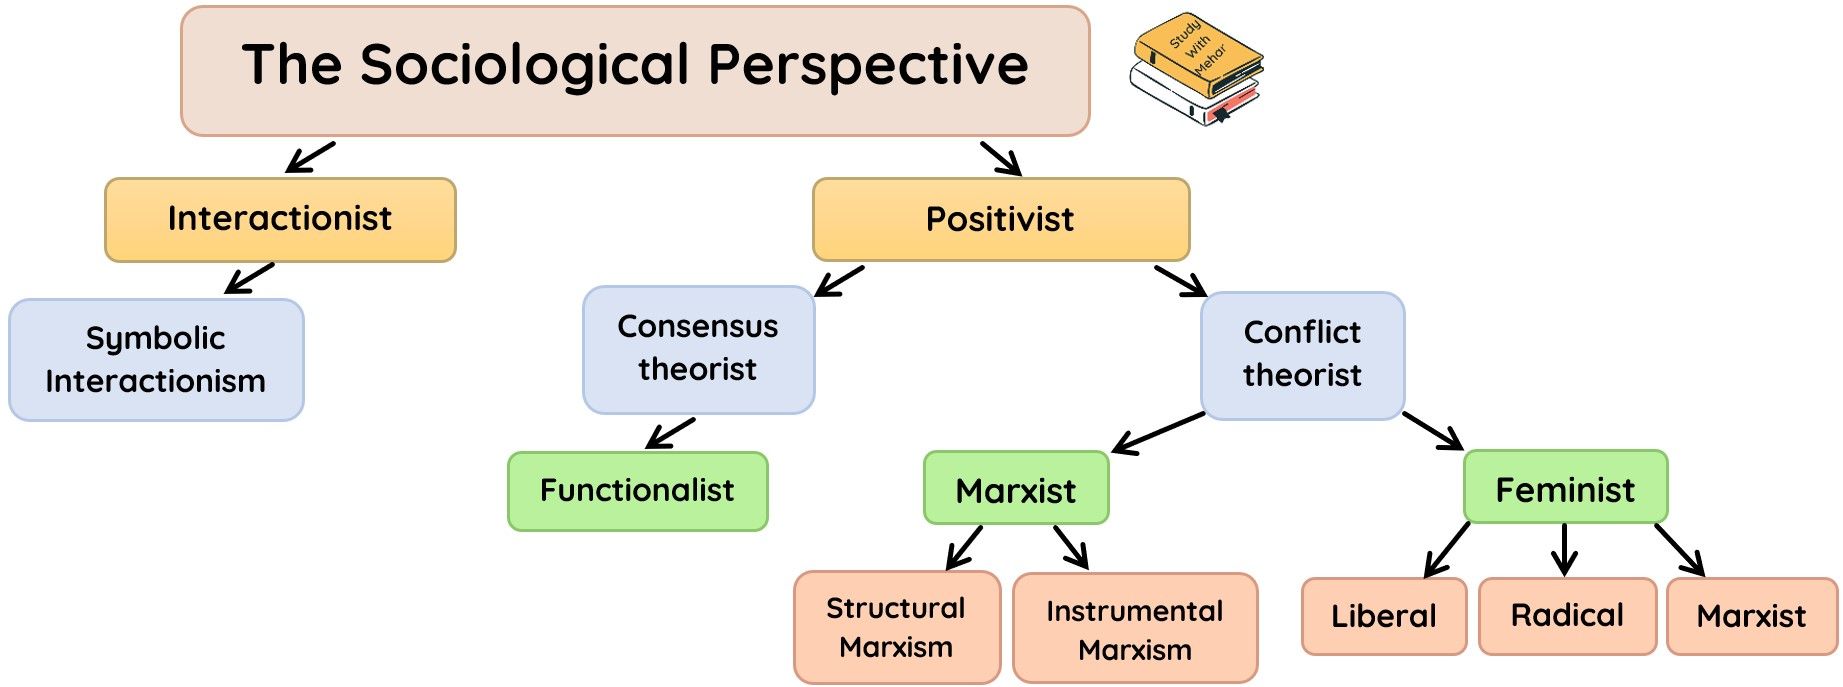 sociological perspective in education essay